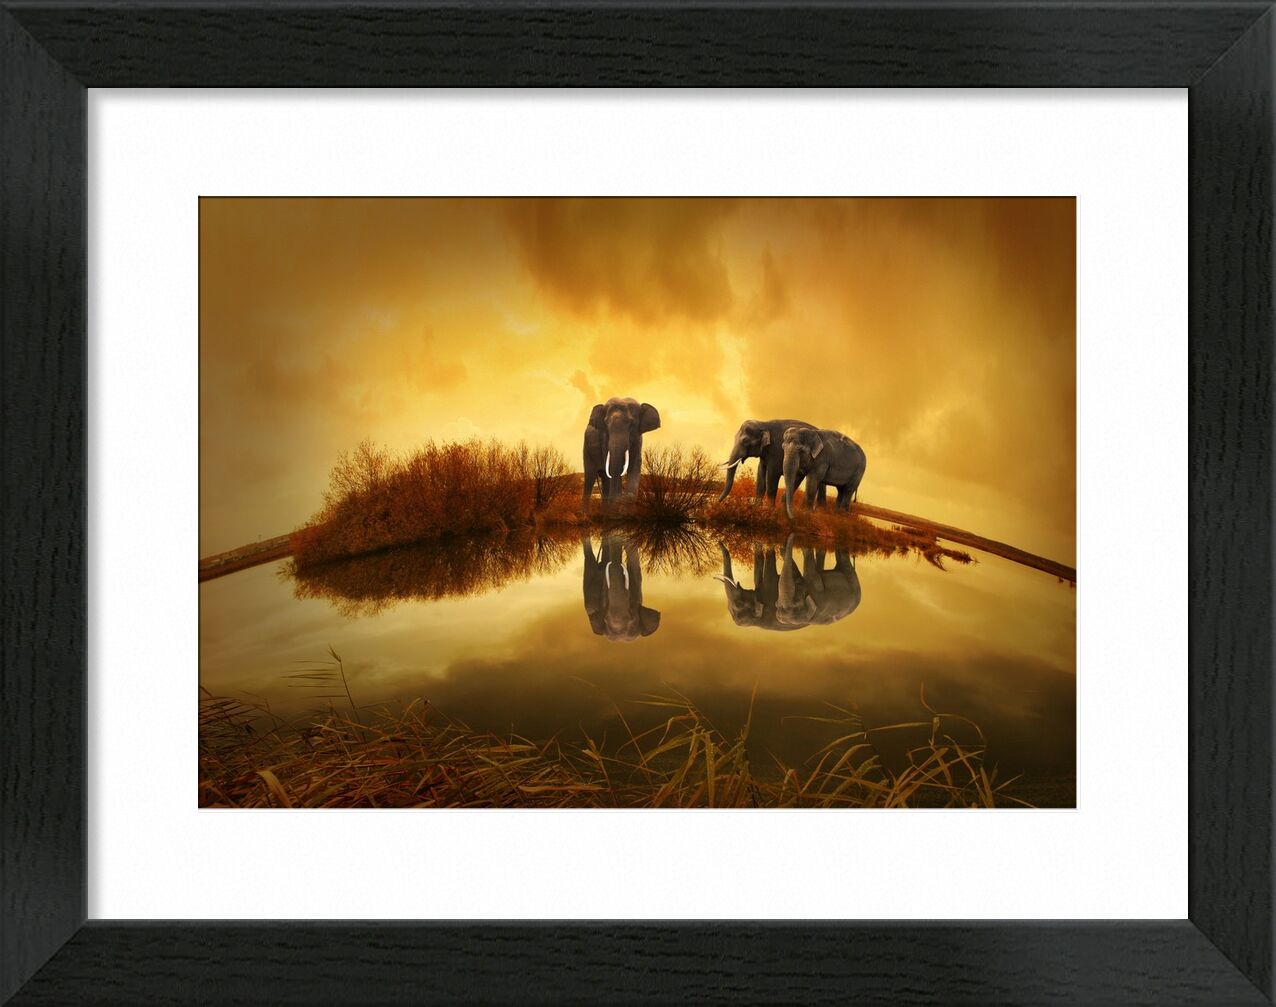 Elephants at the water's edge from Pierre Gaultier, Prodi Art, animals, nature, sunset, elephant, thailand